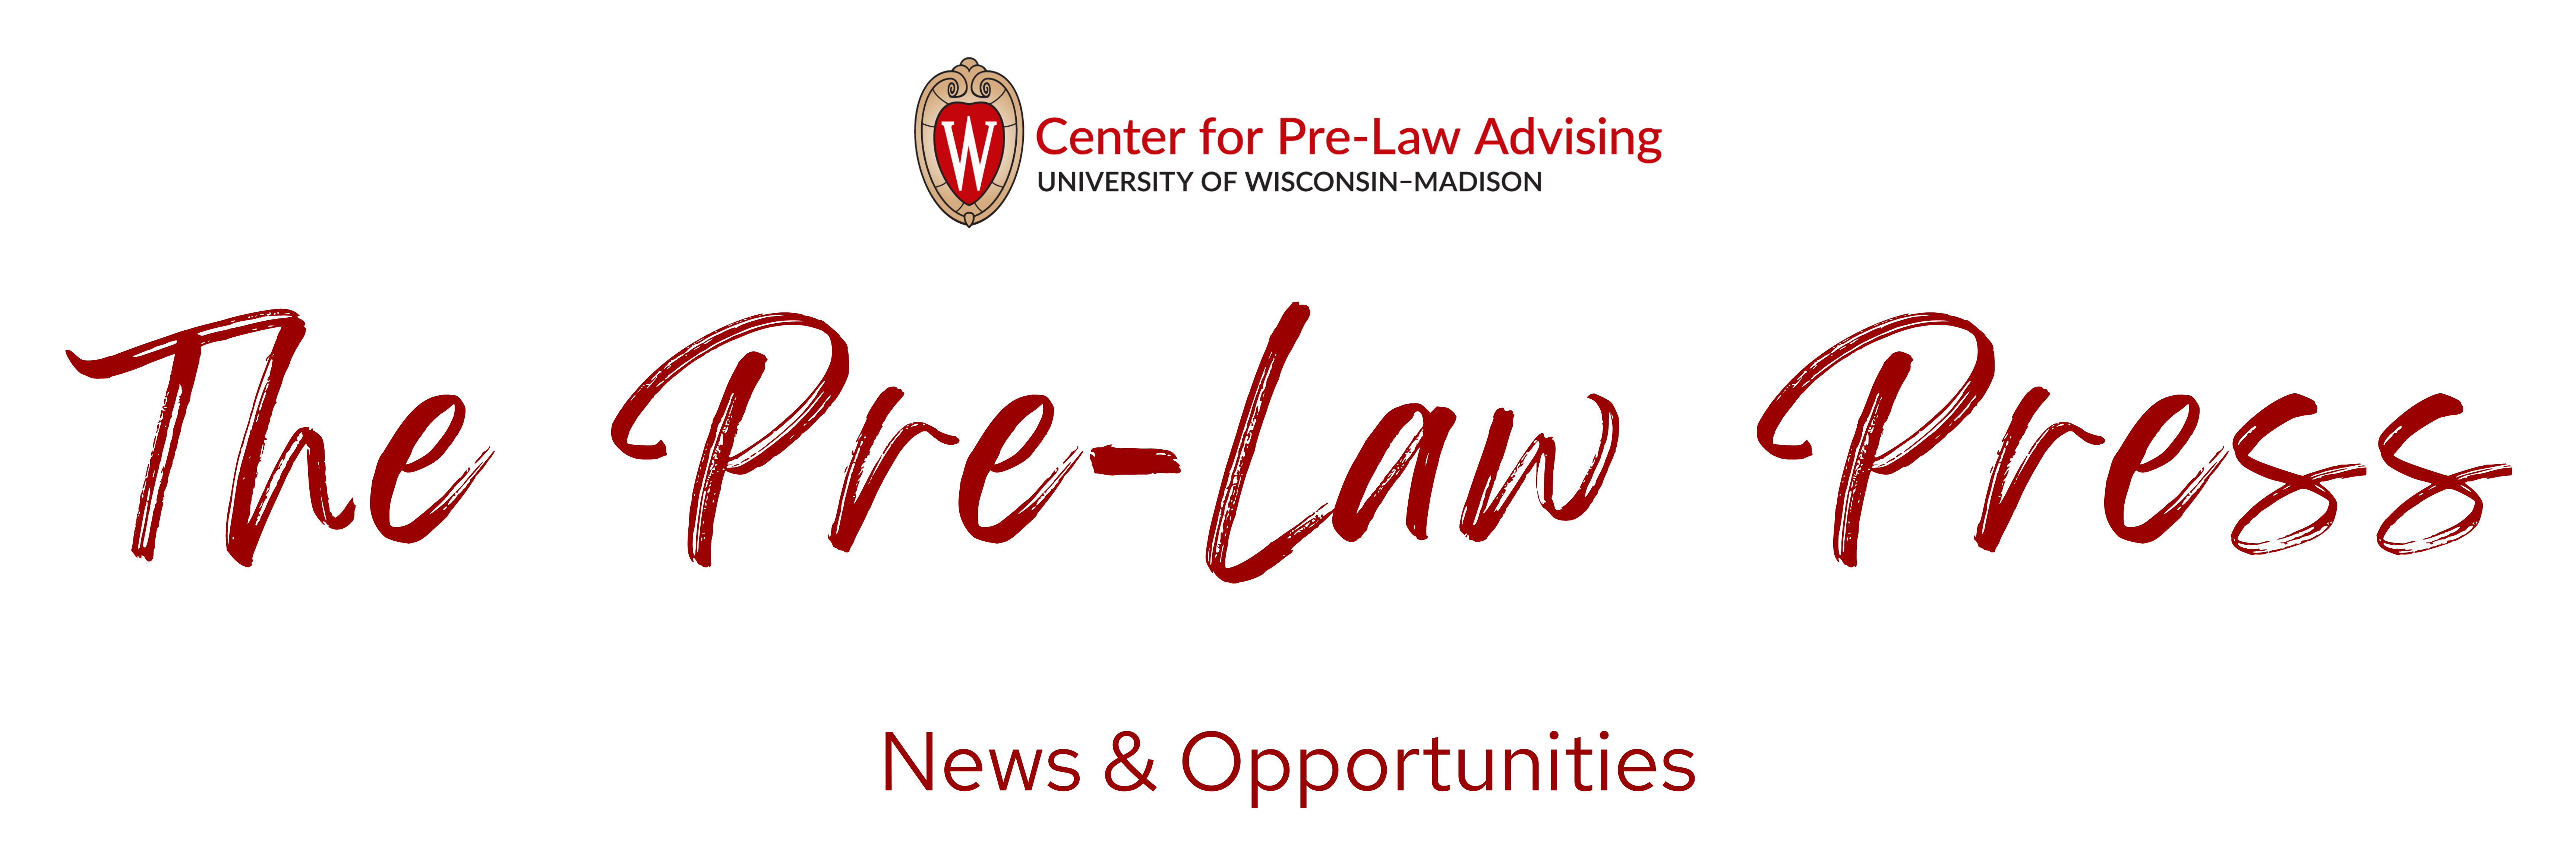 Banner that says "The Pre-Law Press - News & Opportunities" in red